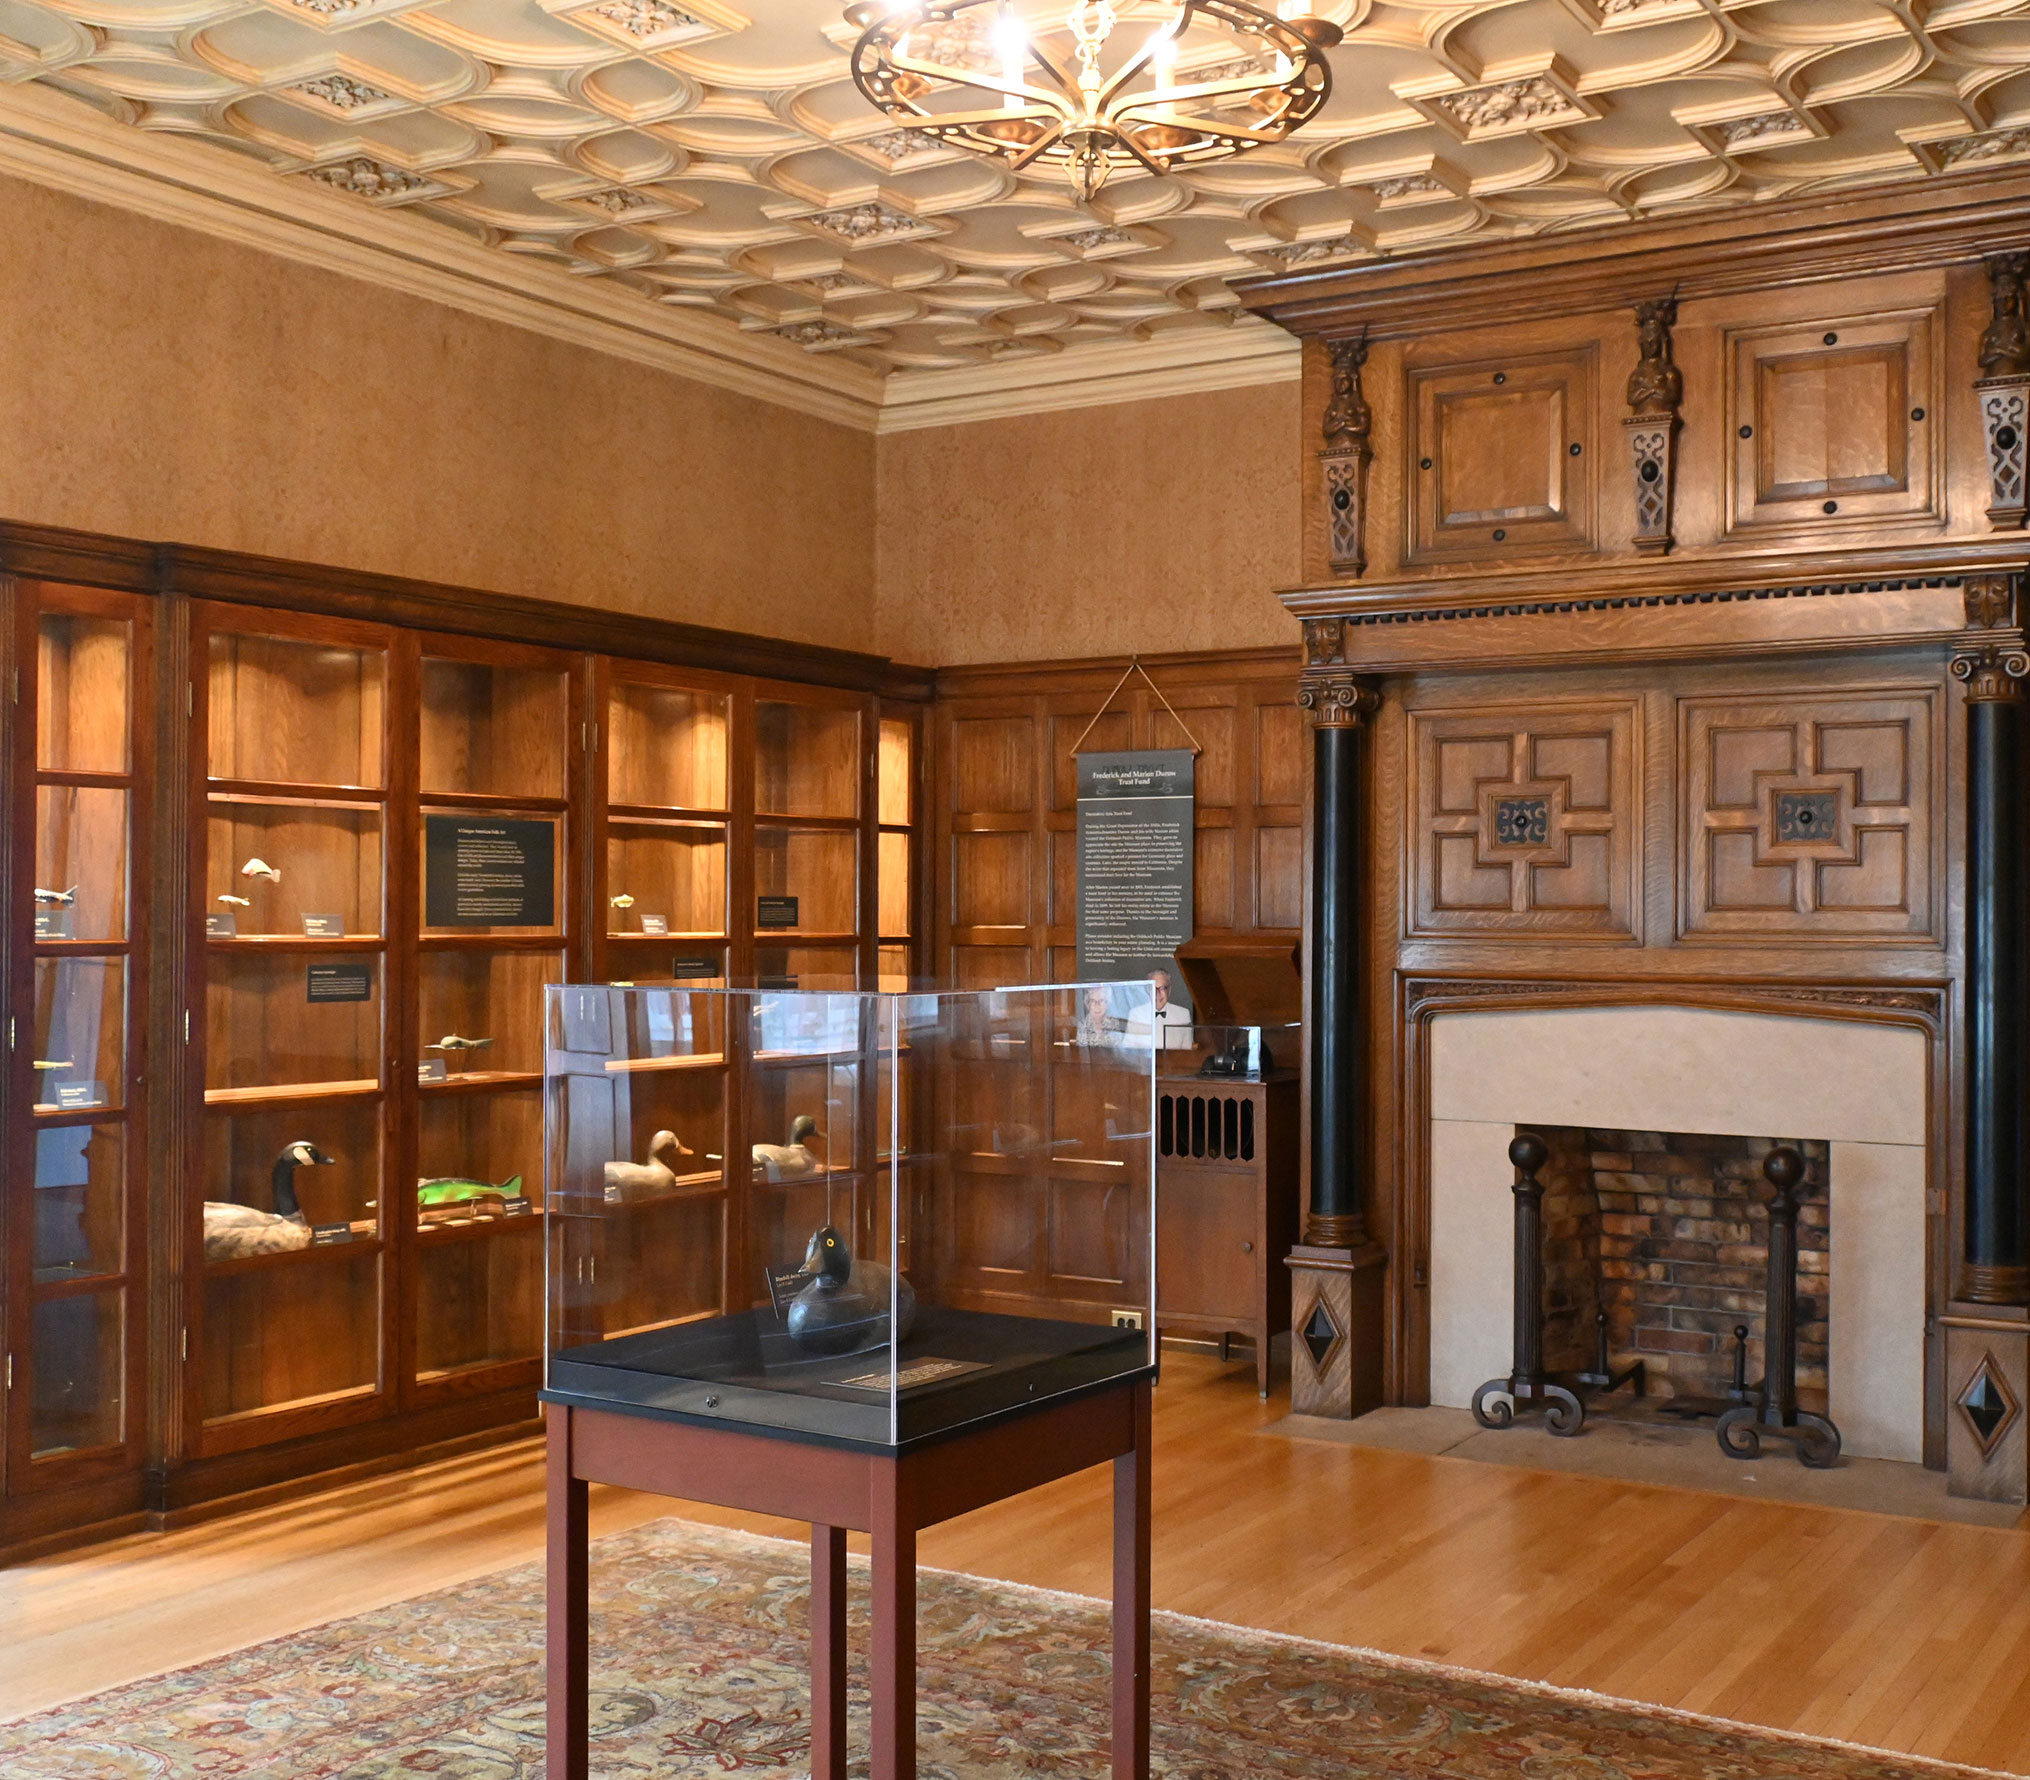 Alluring Art on display in the Historic Sawyer Home library